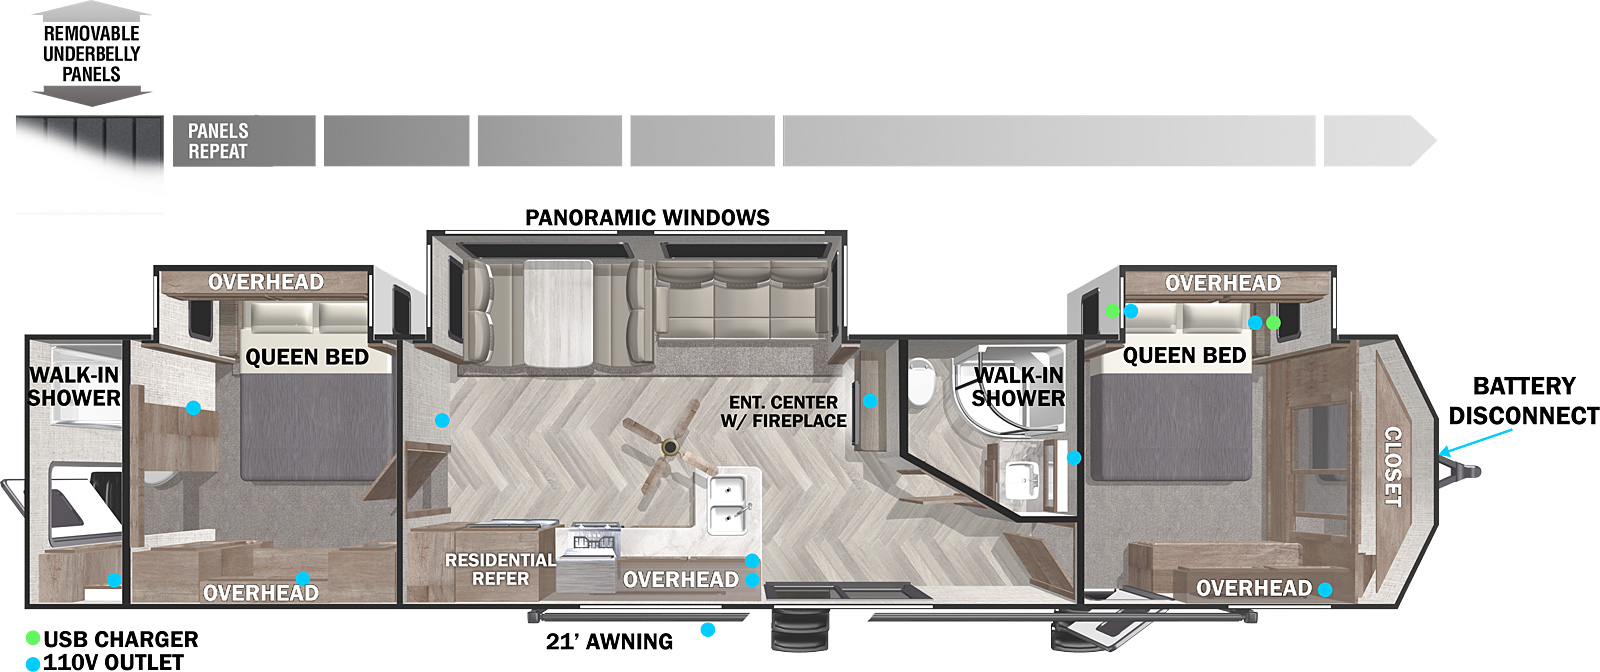 The 4002Q is a dual entry, dual bedroom, and dual bathroom destination travel trailer with a 21 foot electric power awning. The back entry is located in the rear of the floorplan and provides access to the second bedroom through the back bathroom. The back bathroom includes a shower, toilet, linen storage, and sink. Next, the second bedroom that has a queen bed, storage, and TV prep. Next is the kitchen that features a residential referigerator, stainless steel kitchen appliances, and cabinet storage. Across from the kitchen is the dinette and sofa that are in the units slide-out. If you access the unit from the middle glass patio slide doors you will see the entertainment center that has an electric fireplace, soundbar, and TV prep. To the right is a hall way that leads to the bathroom that has a toilet, radius shower, linen storage, and sink. Past the bathroom, is the master bedroom that features a queen bed, overhead storage, modern styled closet, and dresser.